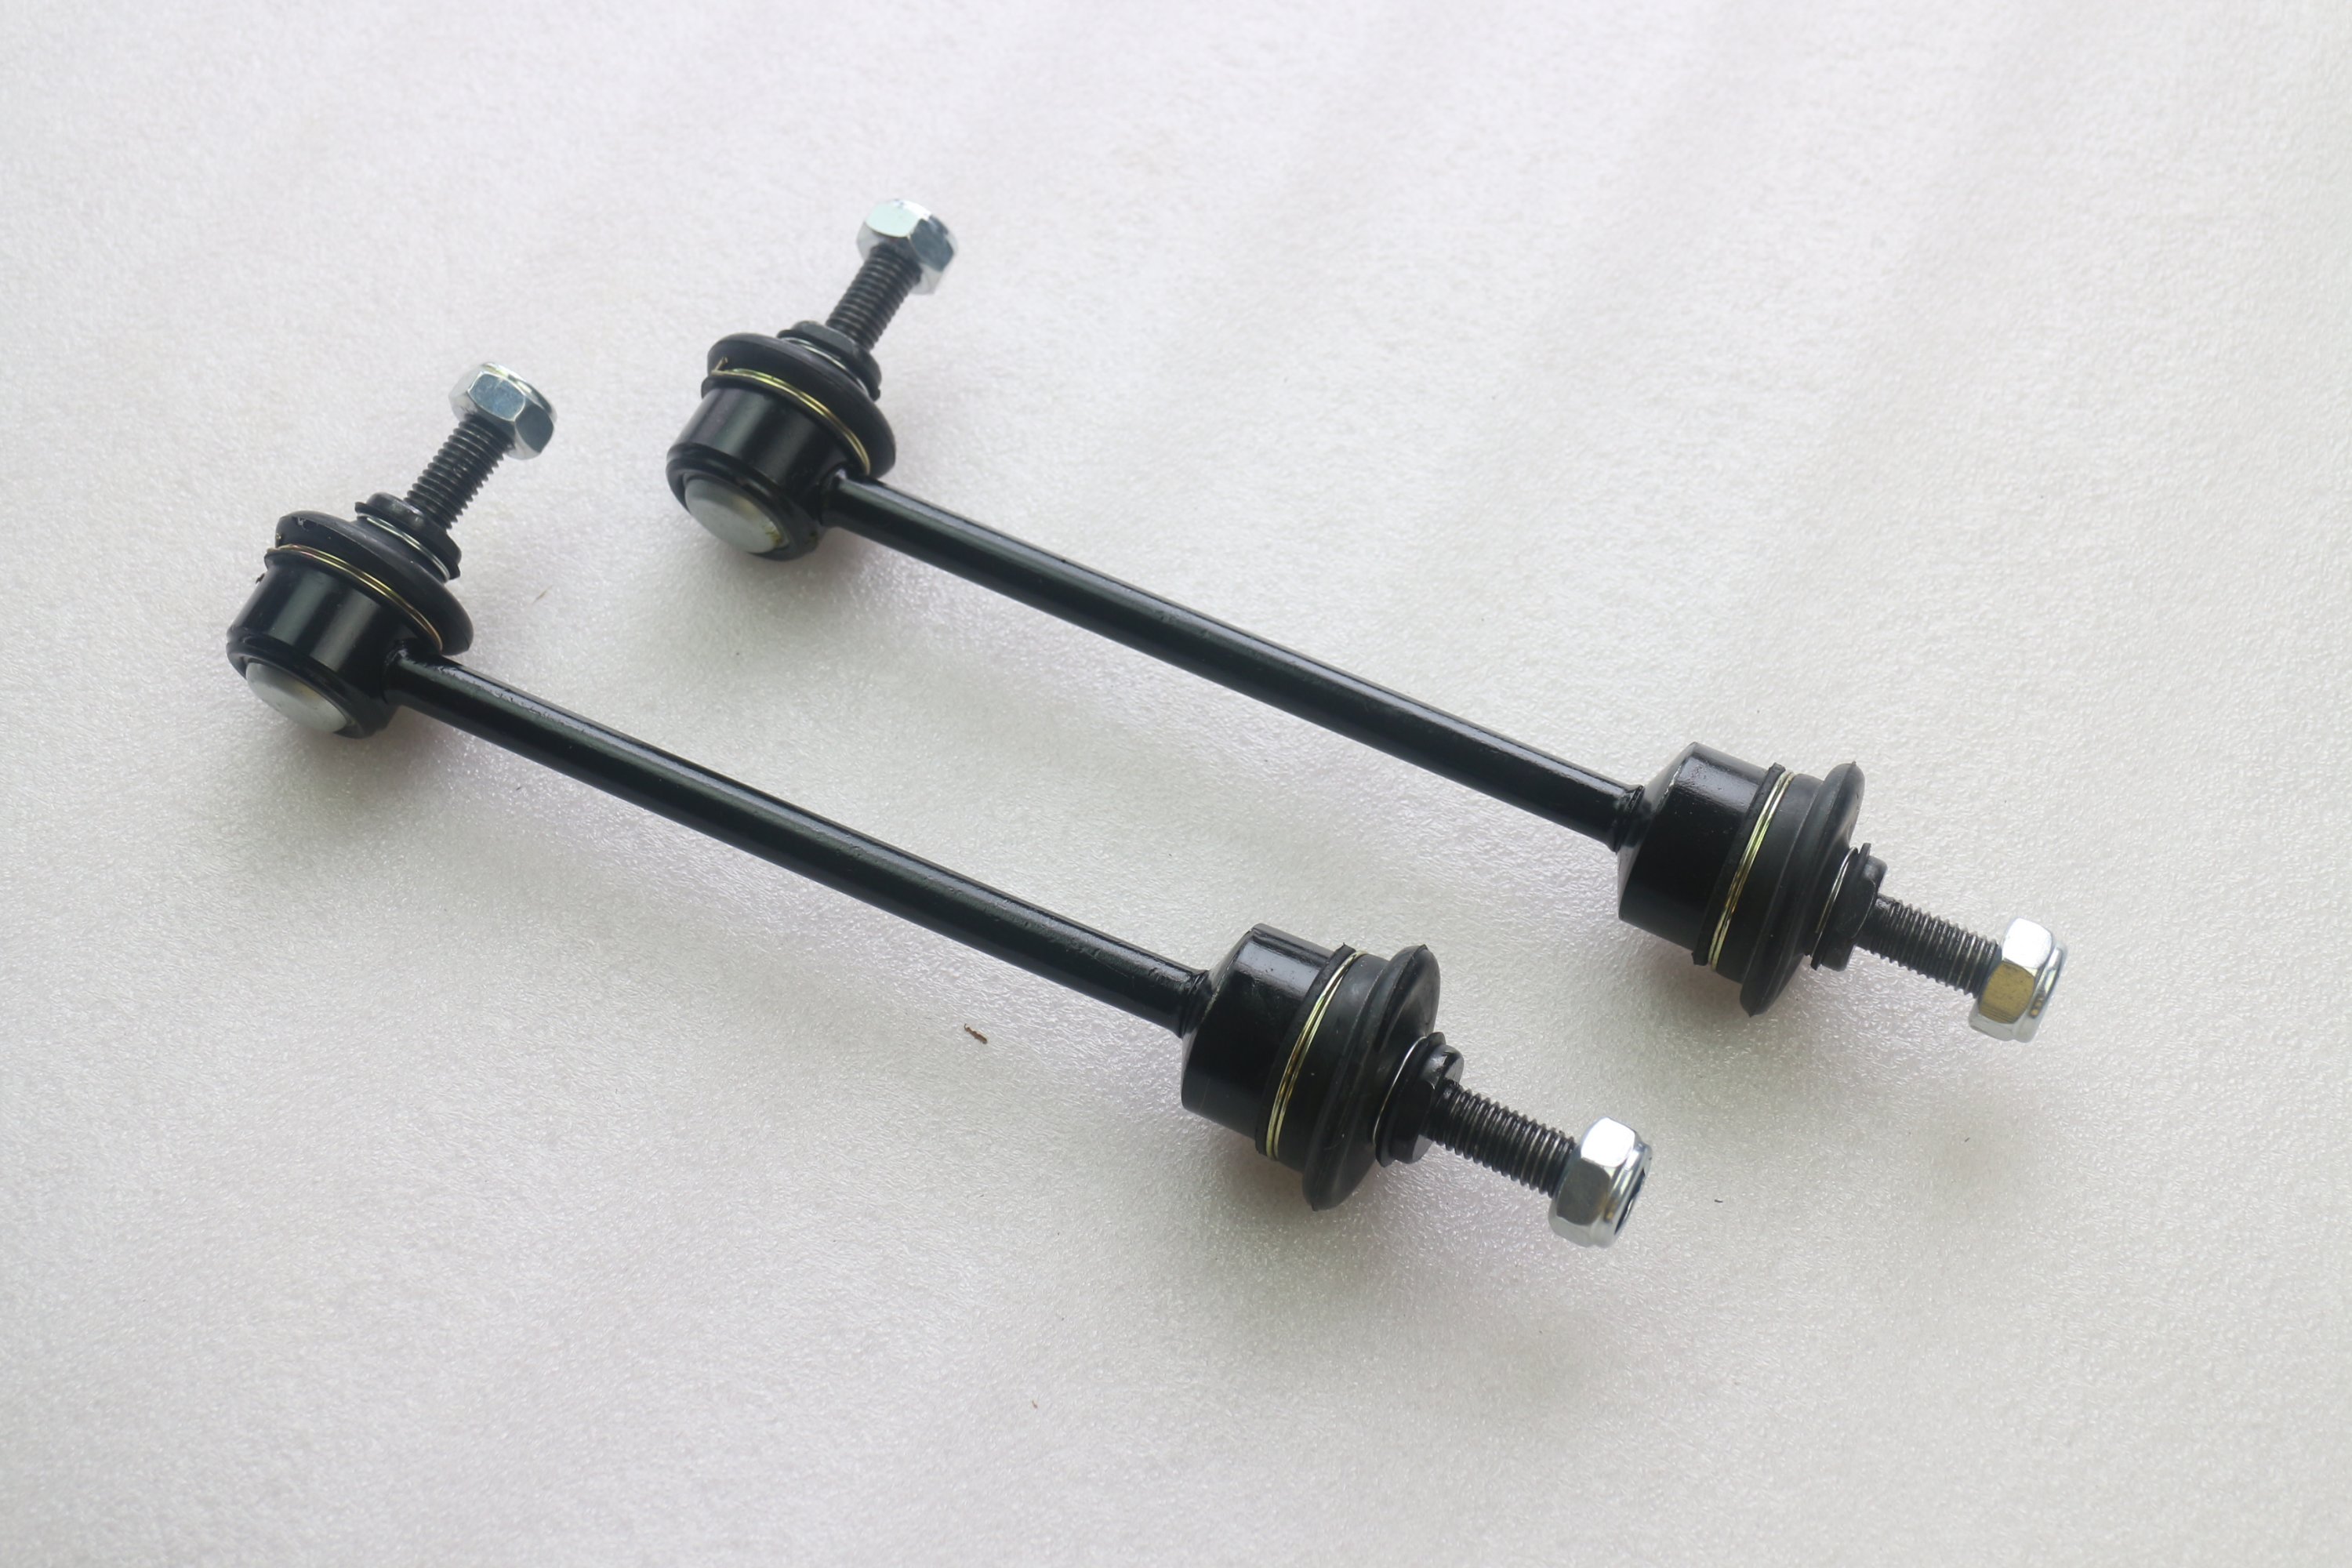 2x Sway Bar Stabilizer Link Fit for Holden Commodore VT-2 VX VY WH WK All 00-05